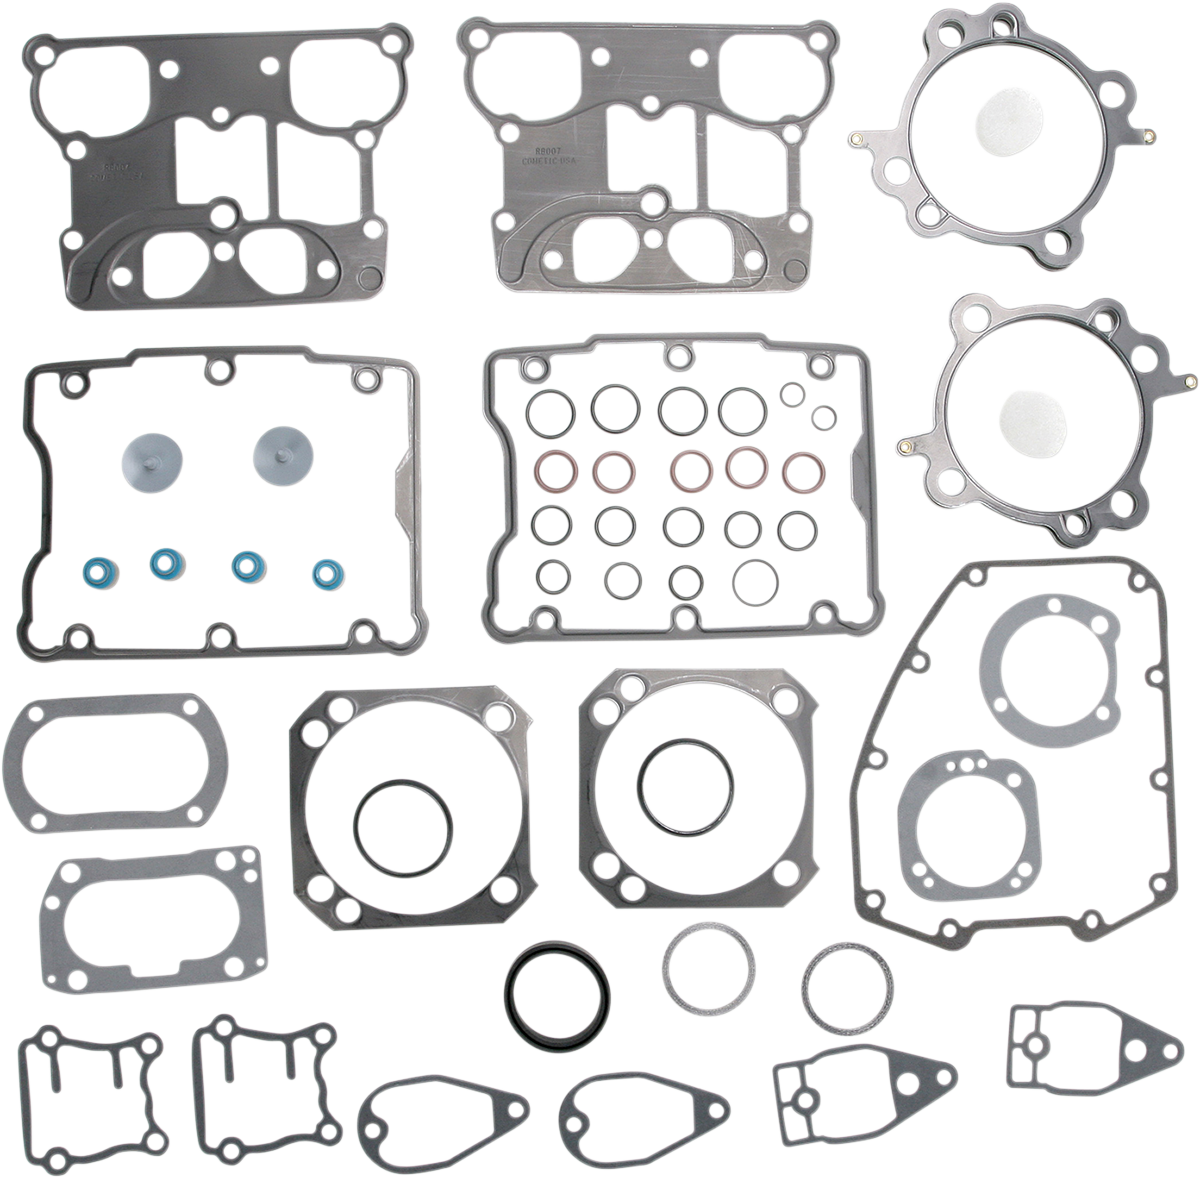 Cometic 4-1/8" Bore Top End Gasket Kit 1999-2017 Harley Dyna Touring Softail FXS